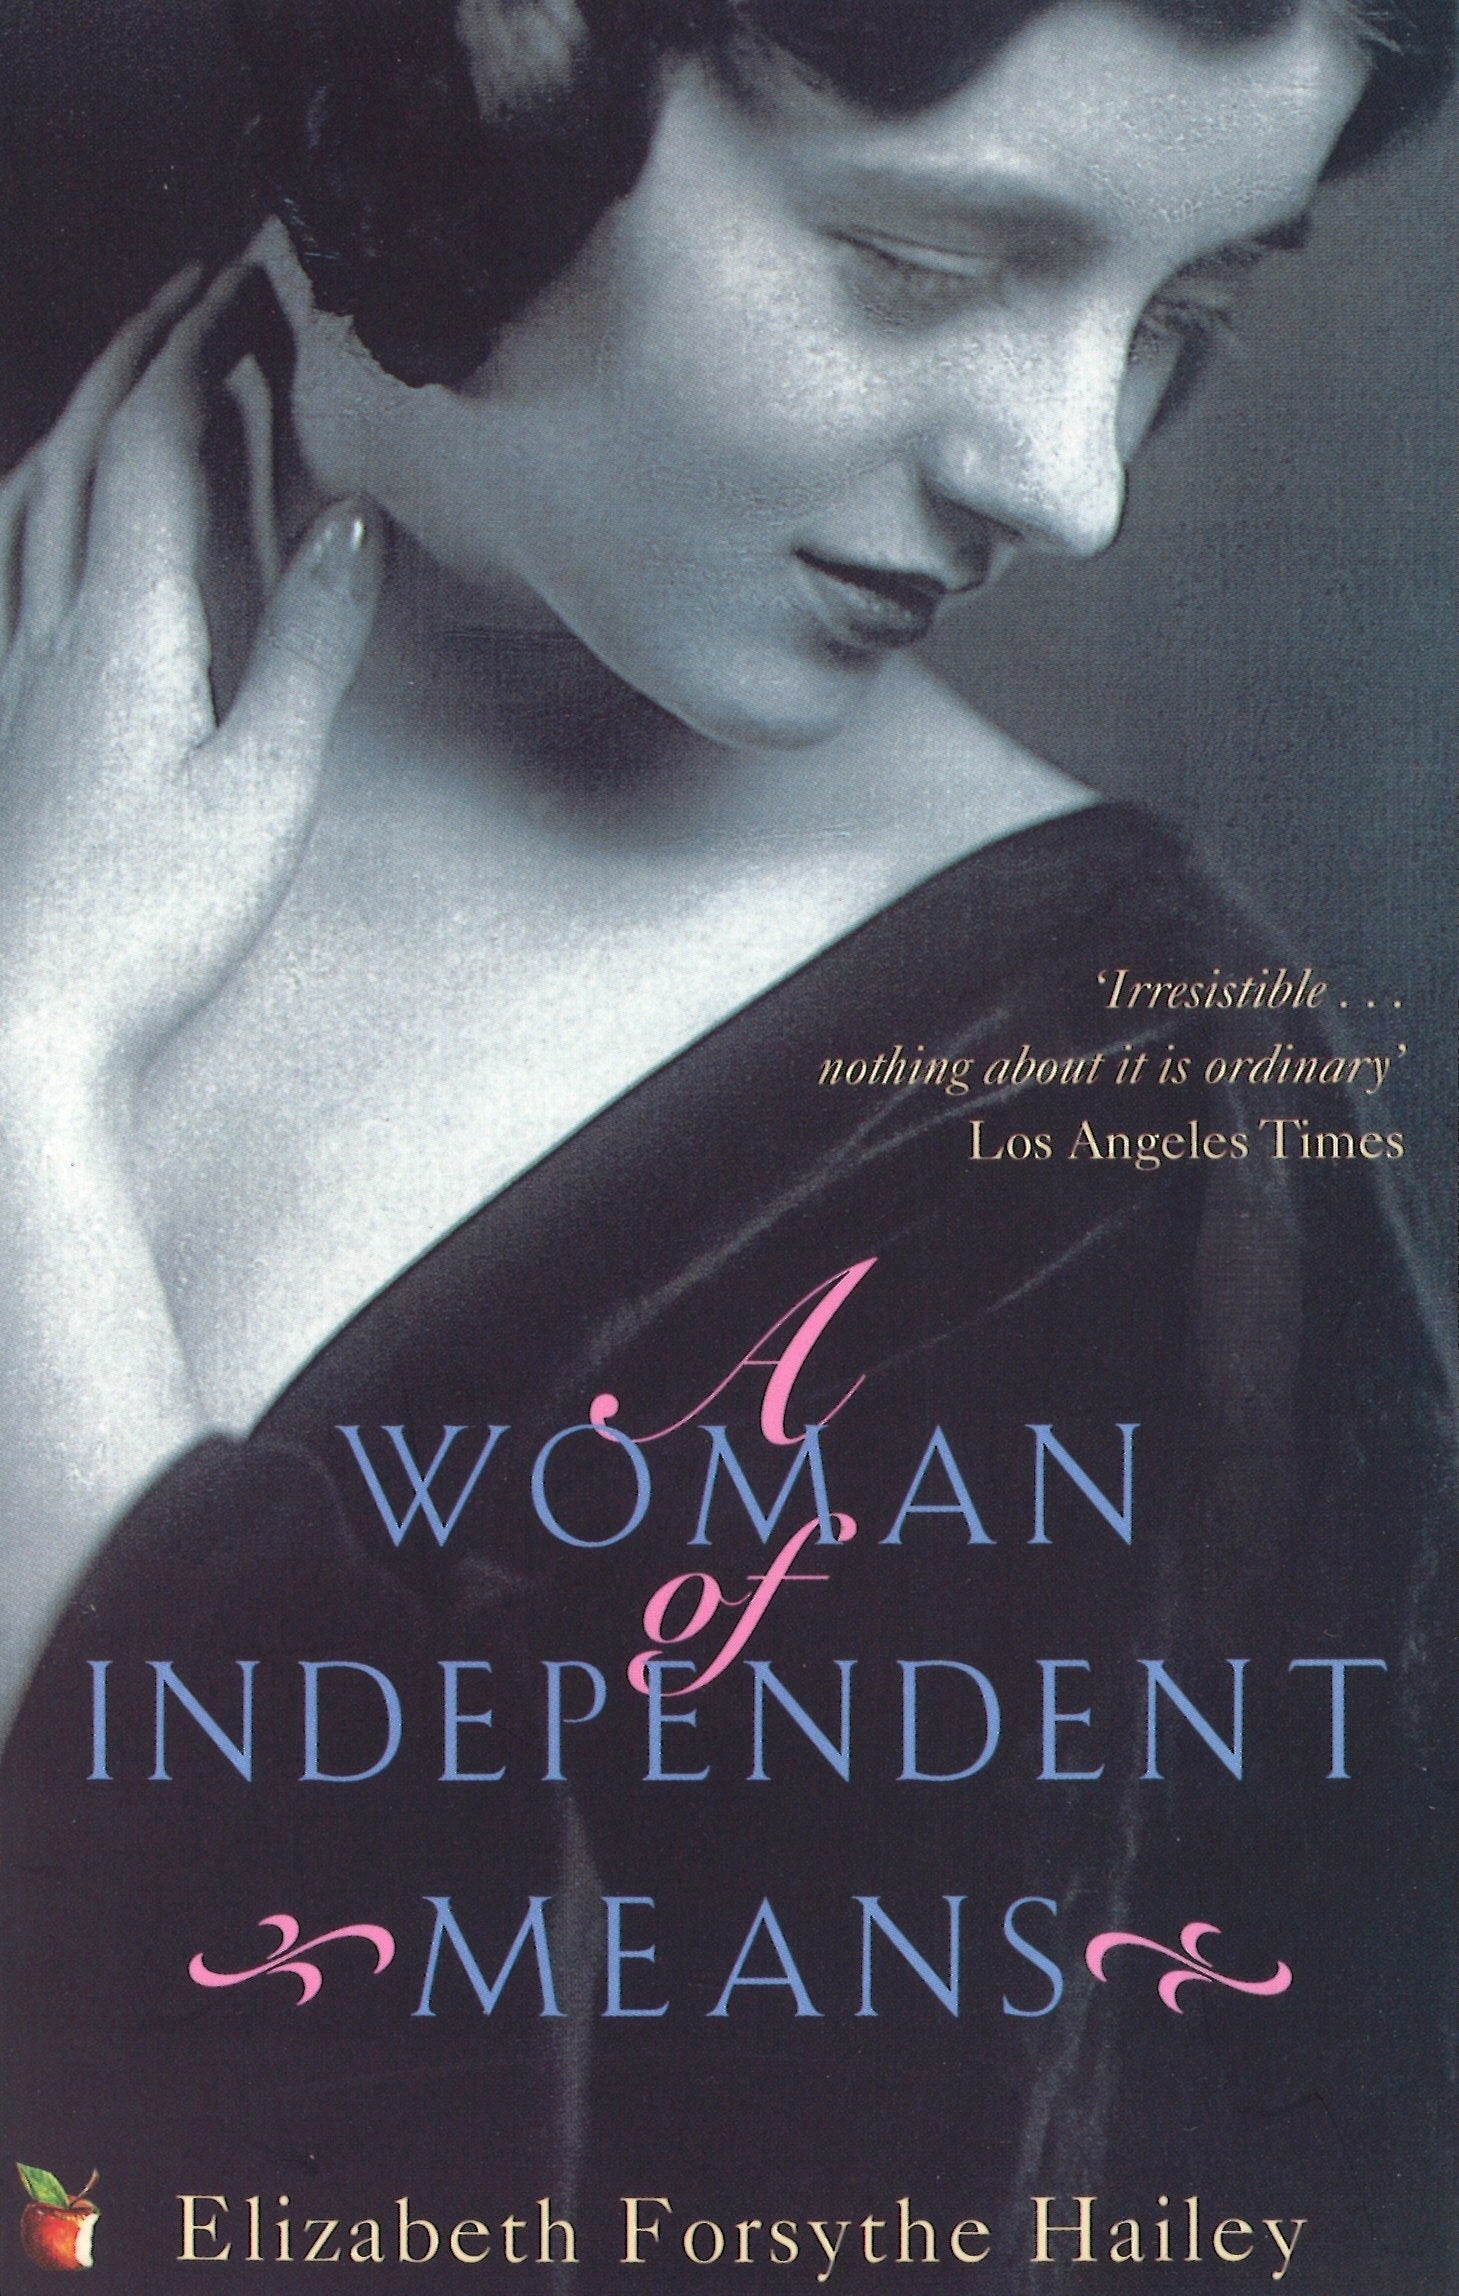 A Woman Of Independent Means by Elizabeth Forsythe Hailey